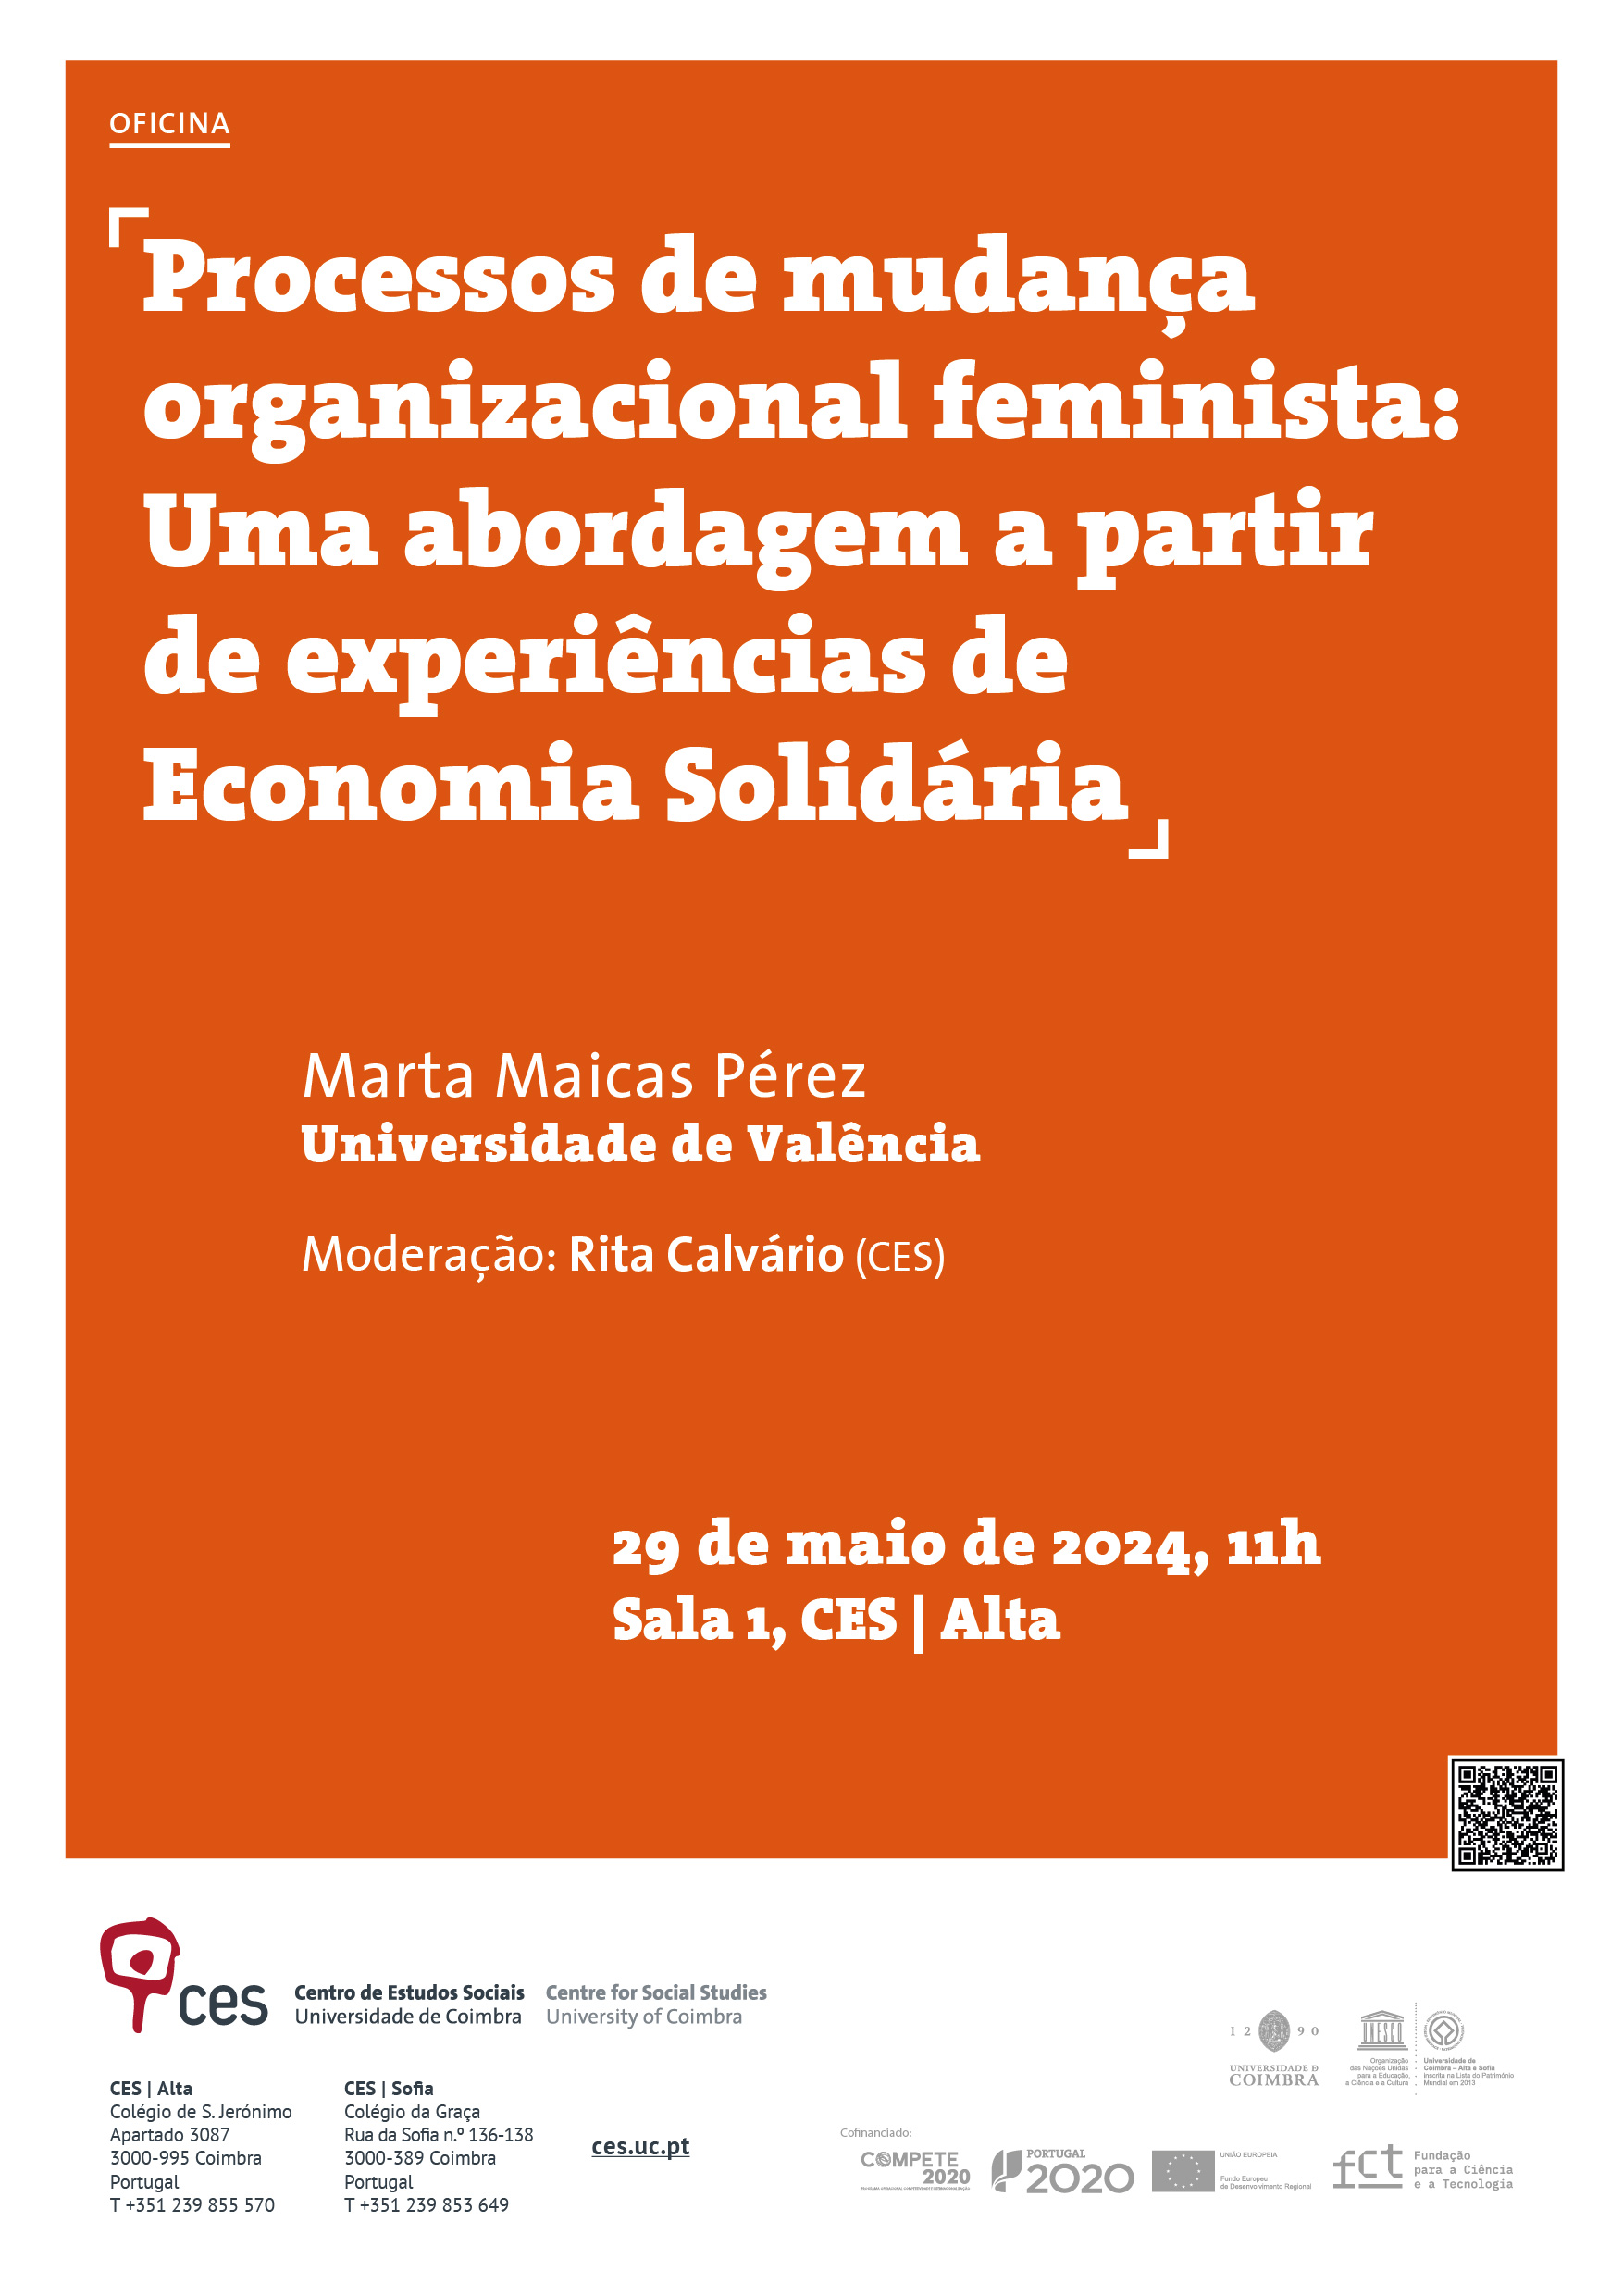 Processes of feminist organisational change: An approach from Solidarity Economy experiences <span id="edit_45877"><script>$(function() { $('#edit_45877').load( "/myces/user/editobj.php?tipo=evento&id=45877" ); });</script></span>